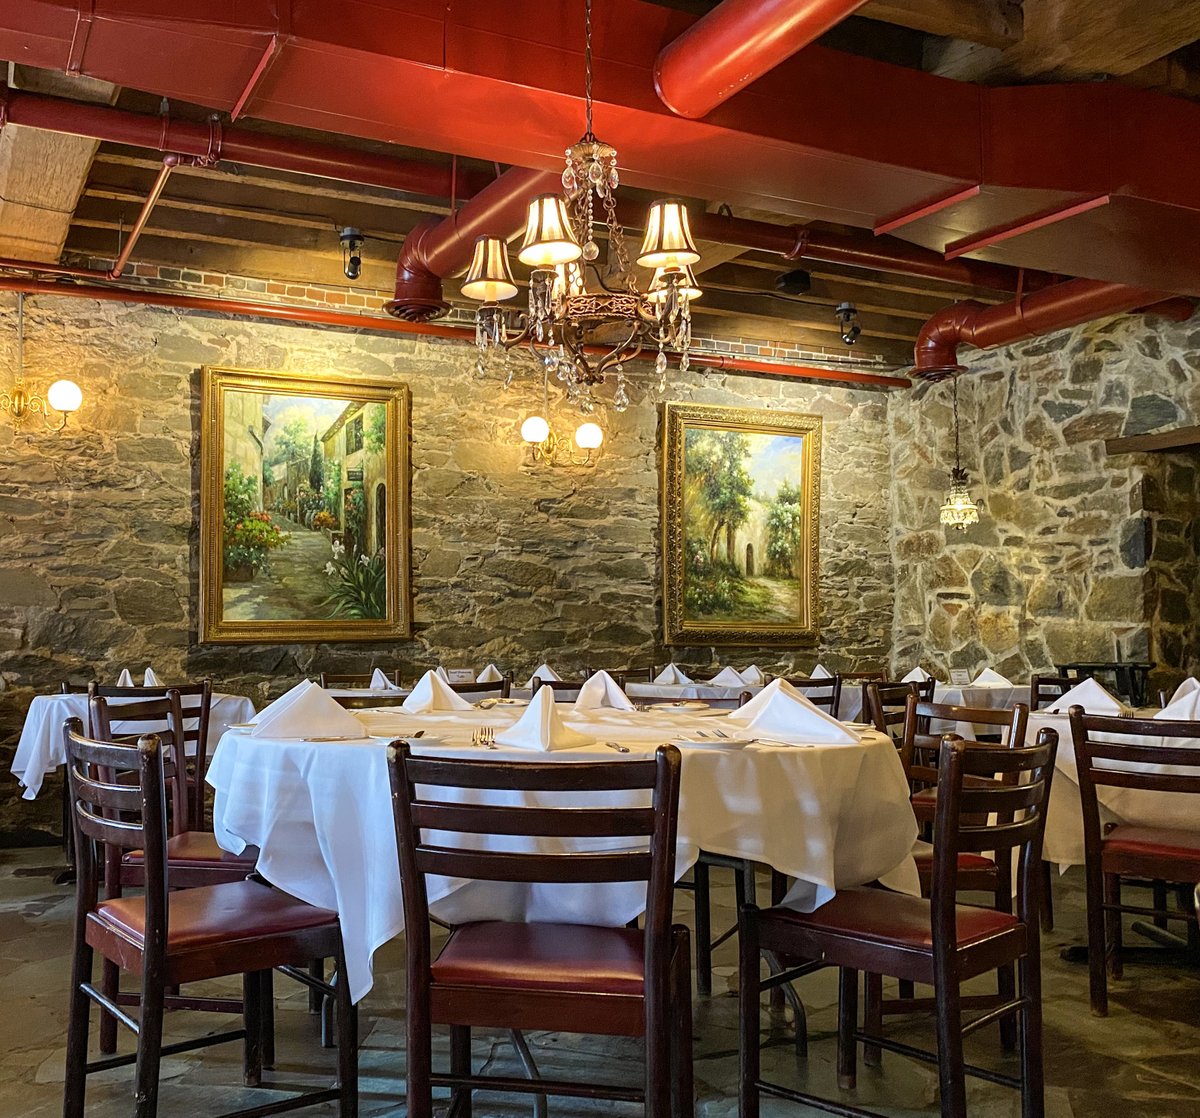 Experience the essence of Italy at Landini Brothers. From timeless flavors to warm hospitality, every bite is a journey to the heart of Italian cuisine.🥂✨
#supportlocalbusiness #foodandwine #virginiafoodies #visitalx #zagat #saveur #italiancuisine #onlineordering #dmvfoodie